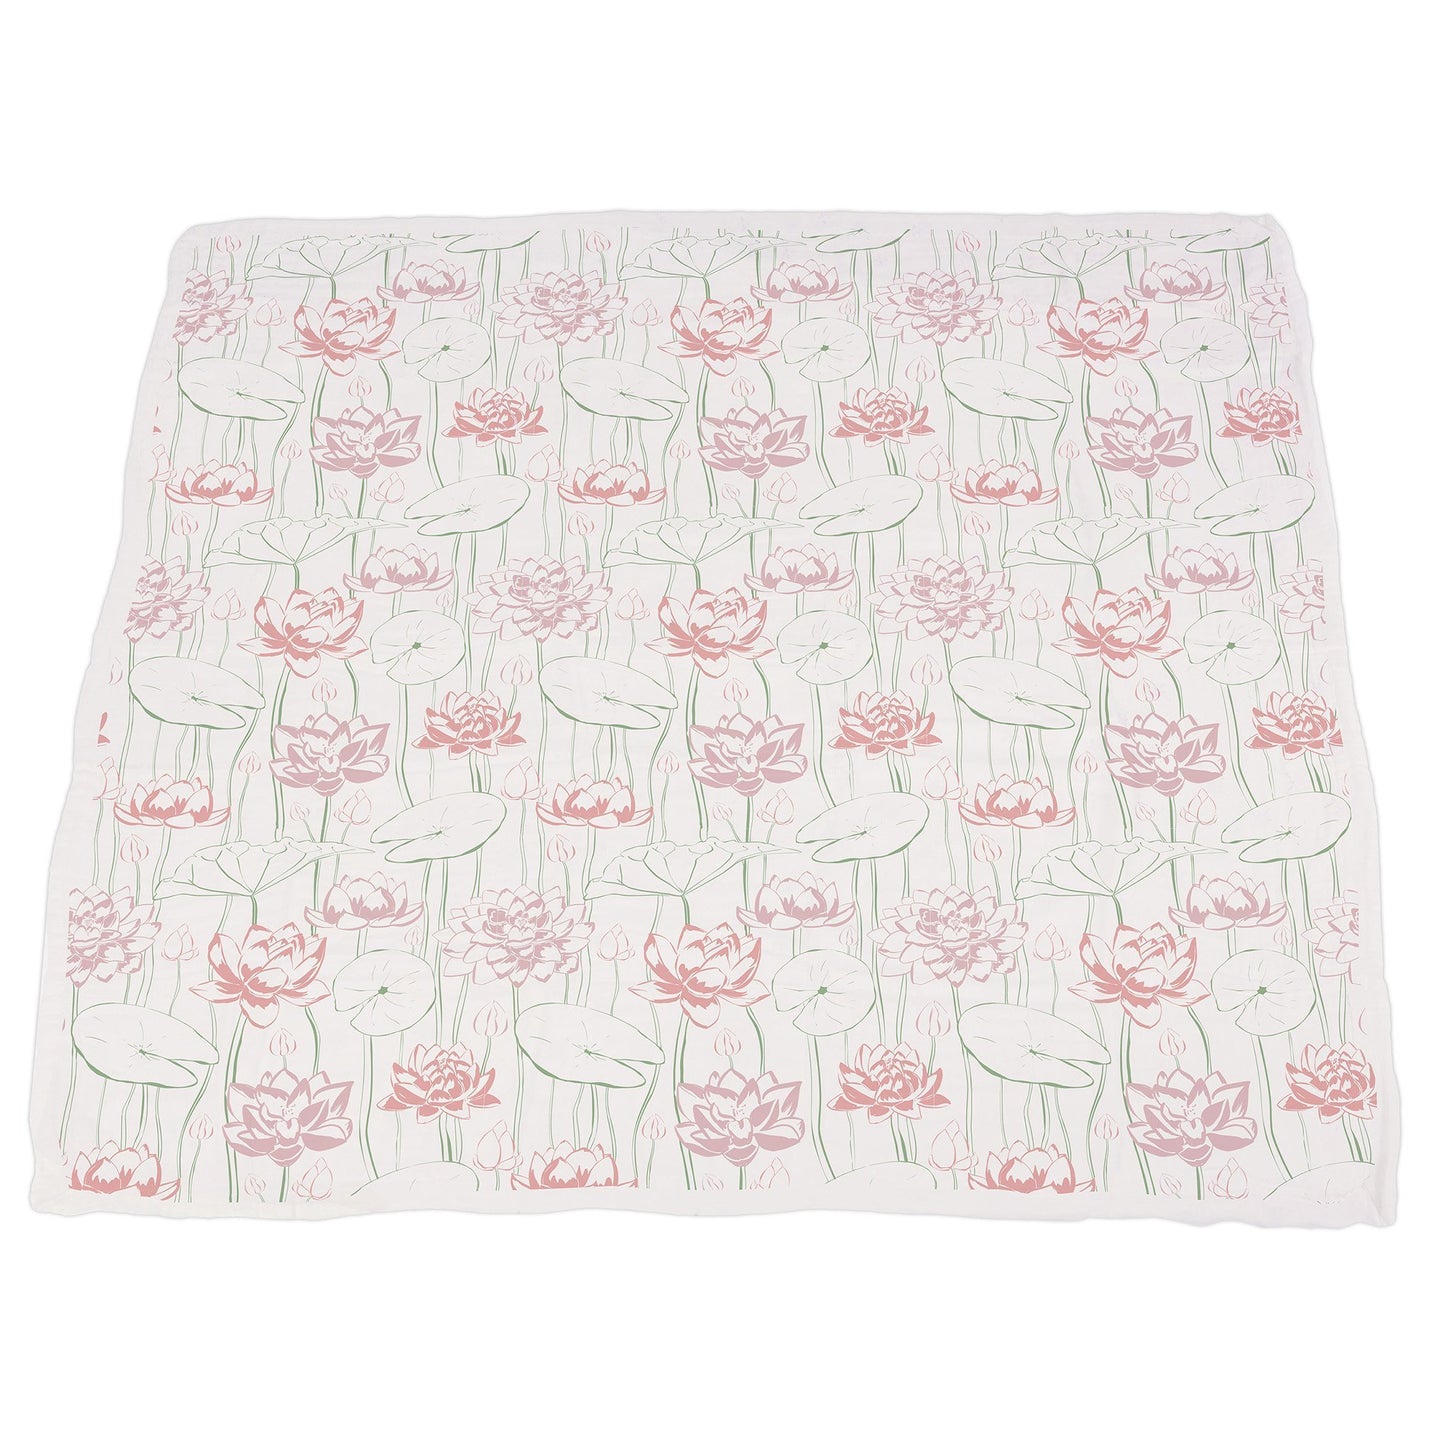 Turtles and Water Lily Bamboo Muslin Newcastle Blanket